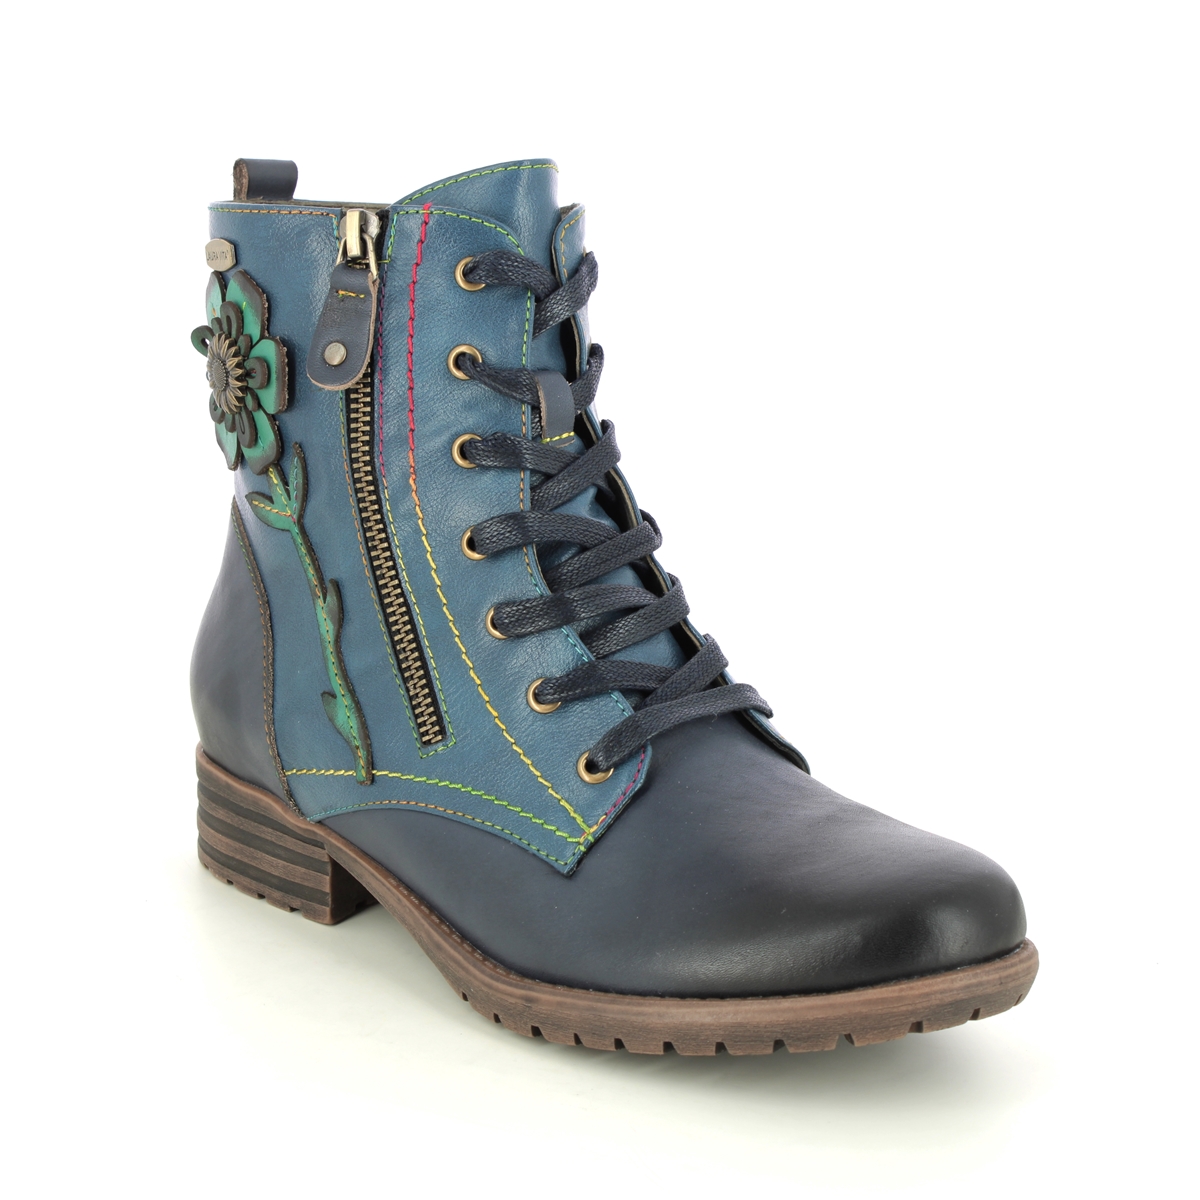 Laura Vita - Gacmayo 86 Zip (Blue Leather) 4395-75 In Size 39 In Floral Blue Leather